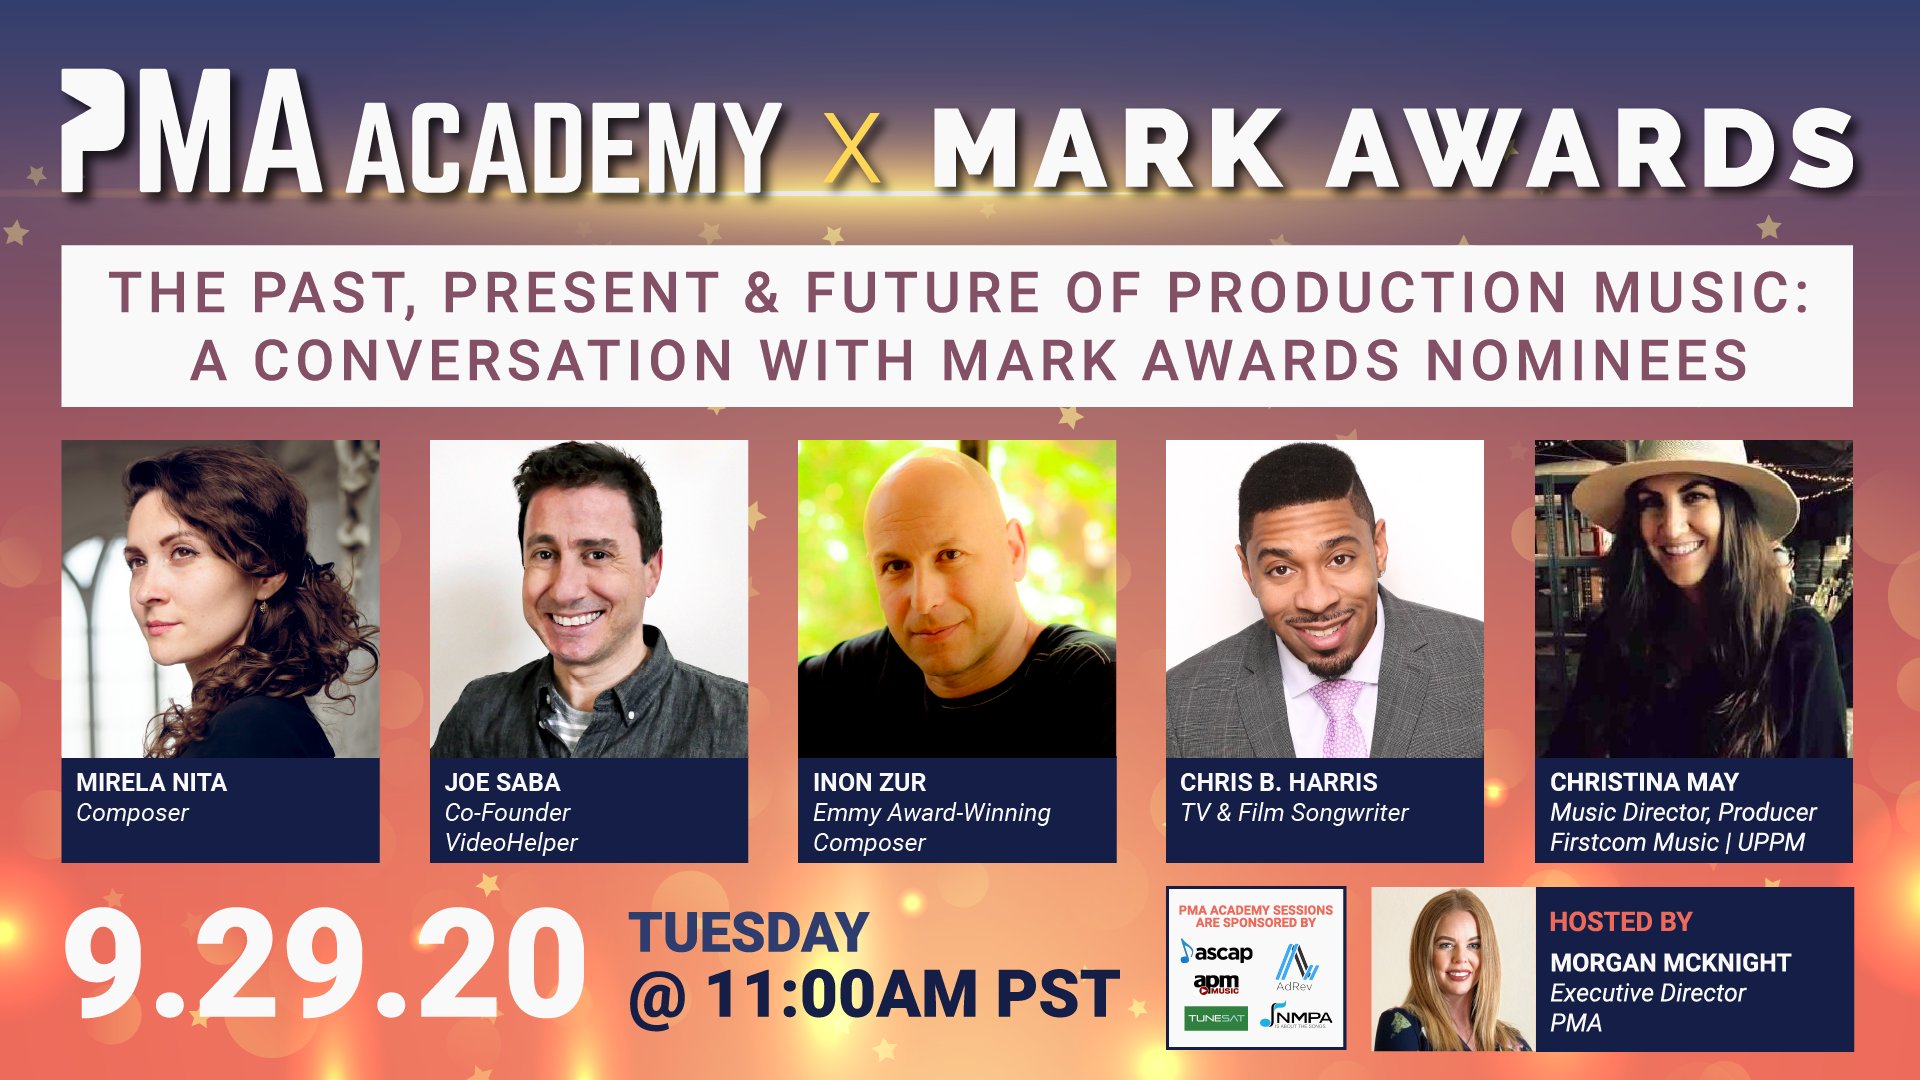 The Past, Present & Future of Production Music: A Conversation with Mark Awards Nominees - Tuesday, October 29